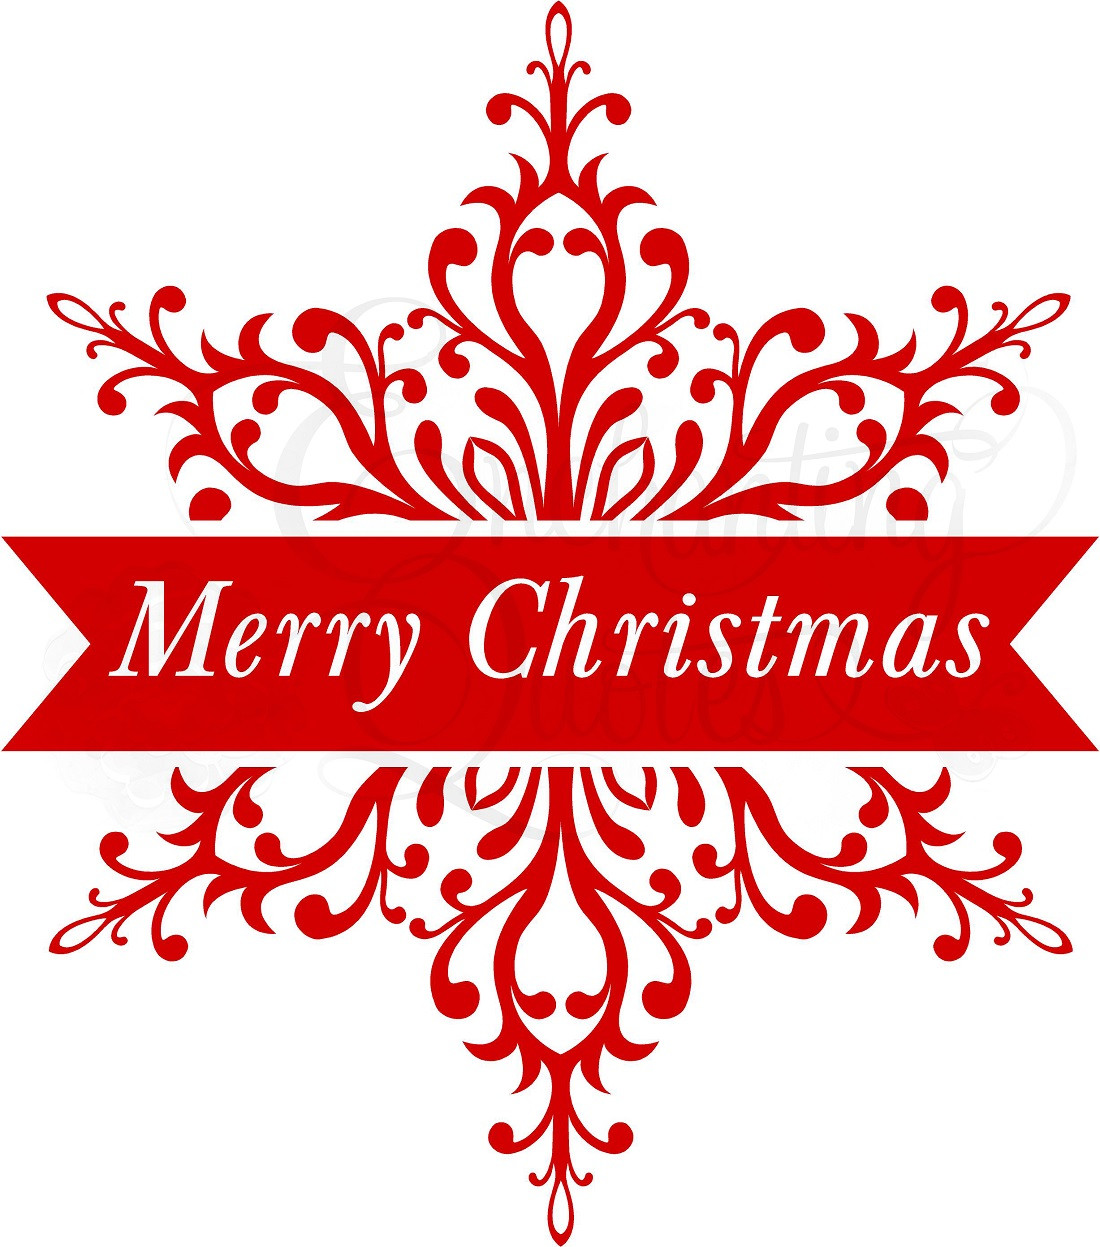 Merry Christmas Quotes For Family
 Christmas Quotes About Family QuotesGram